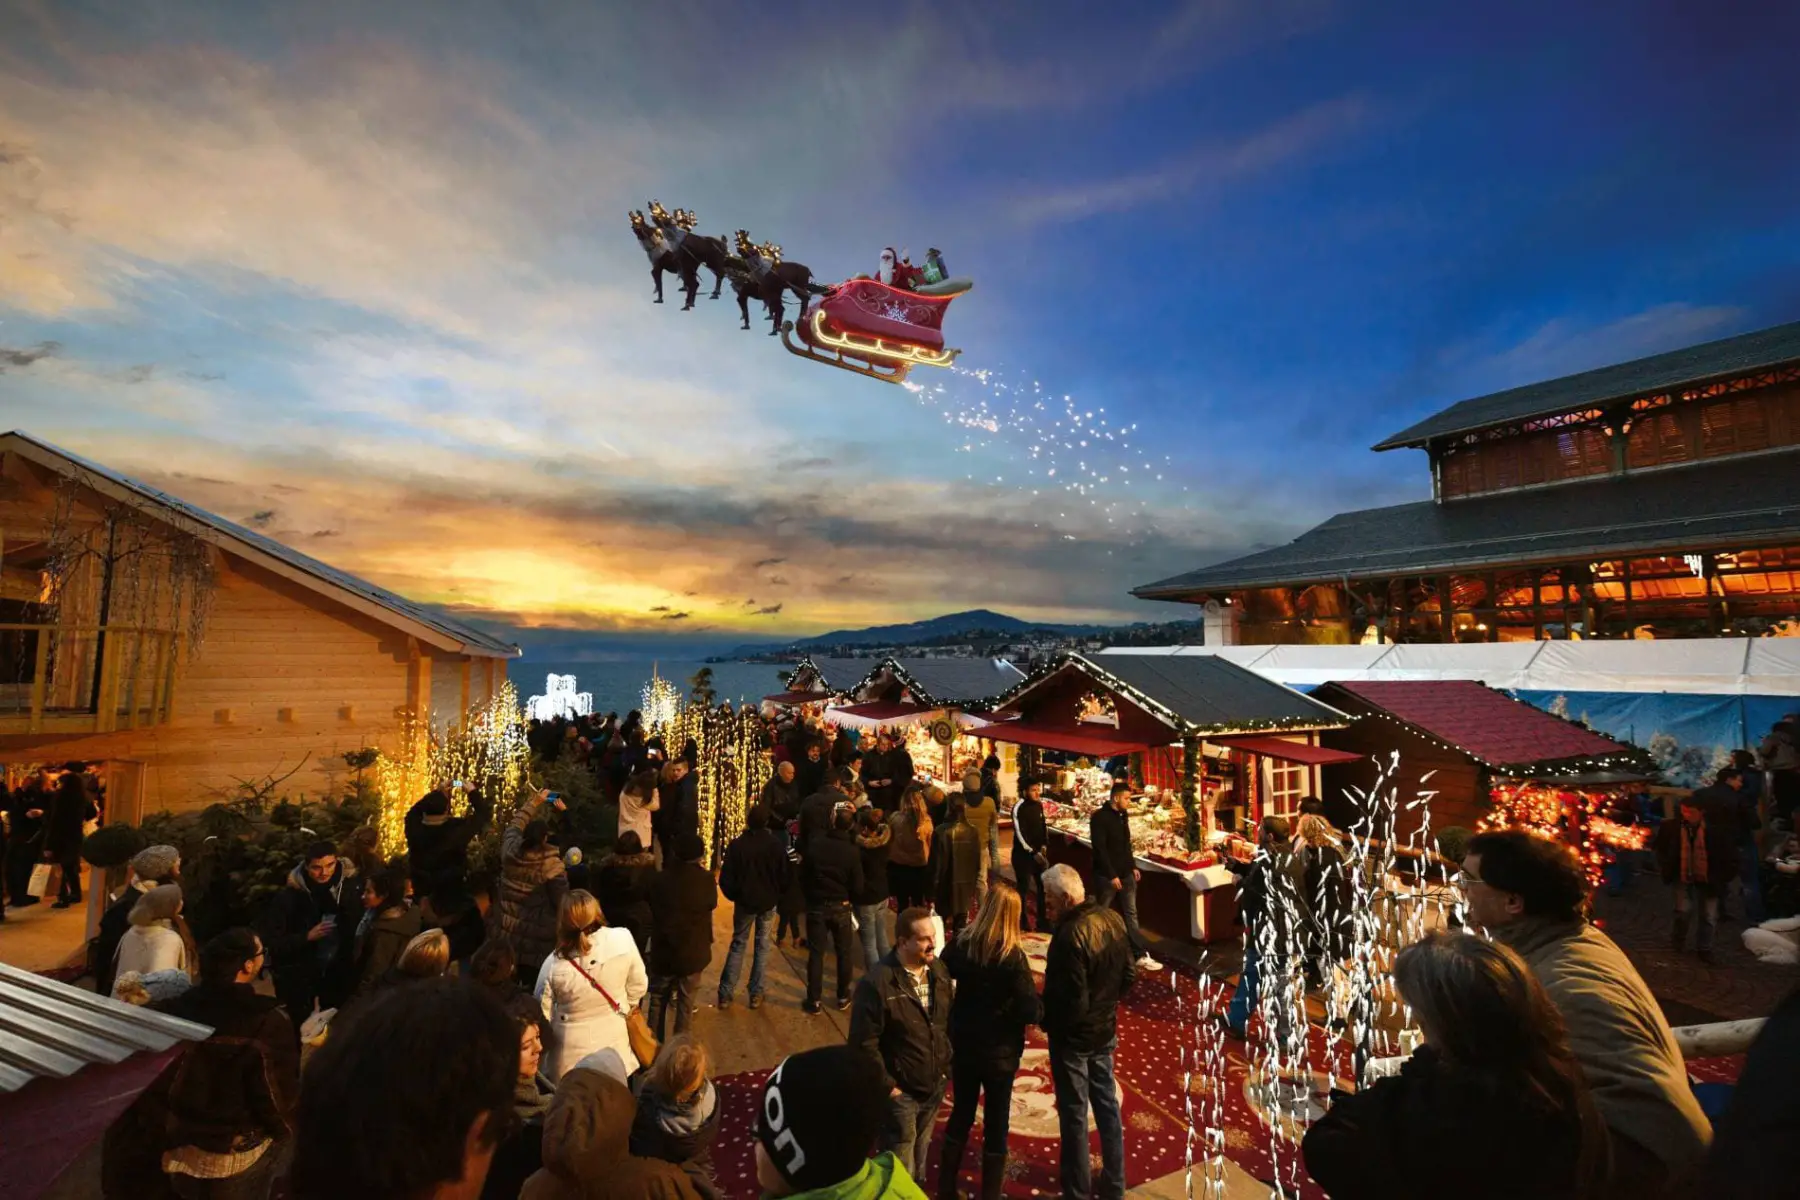 Santa flying his sleigh over the busy Christmas market at Montreux Noël 